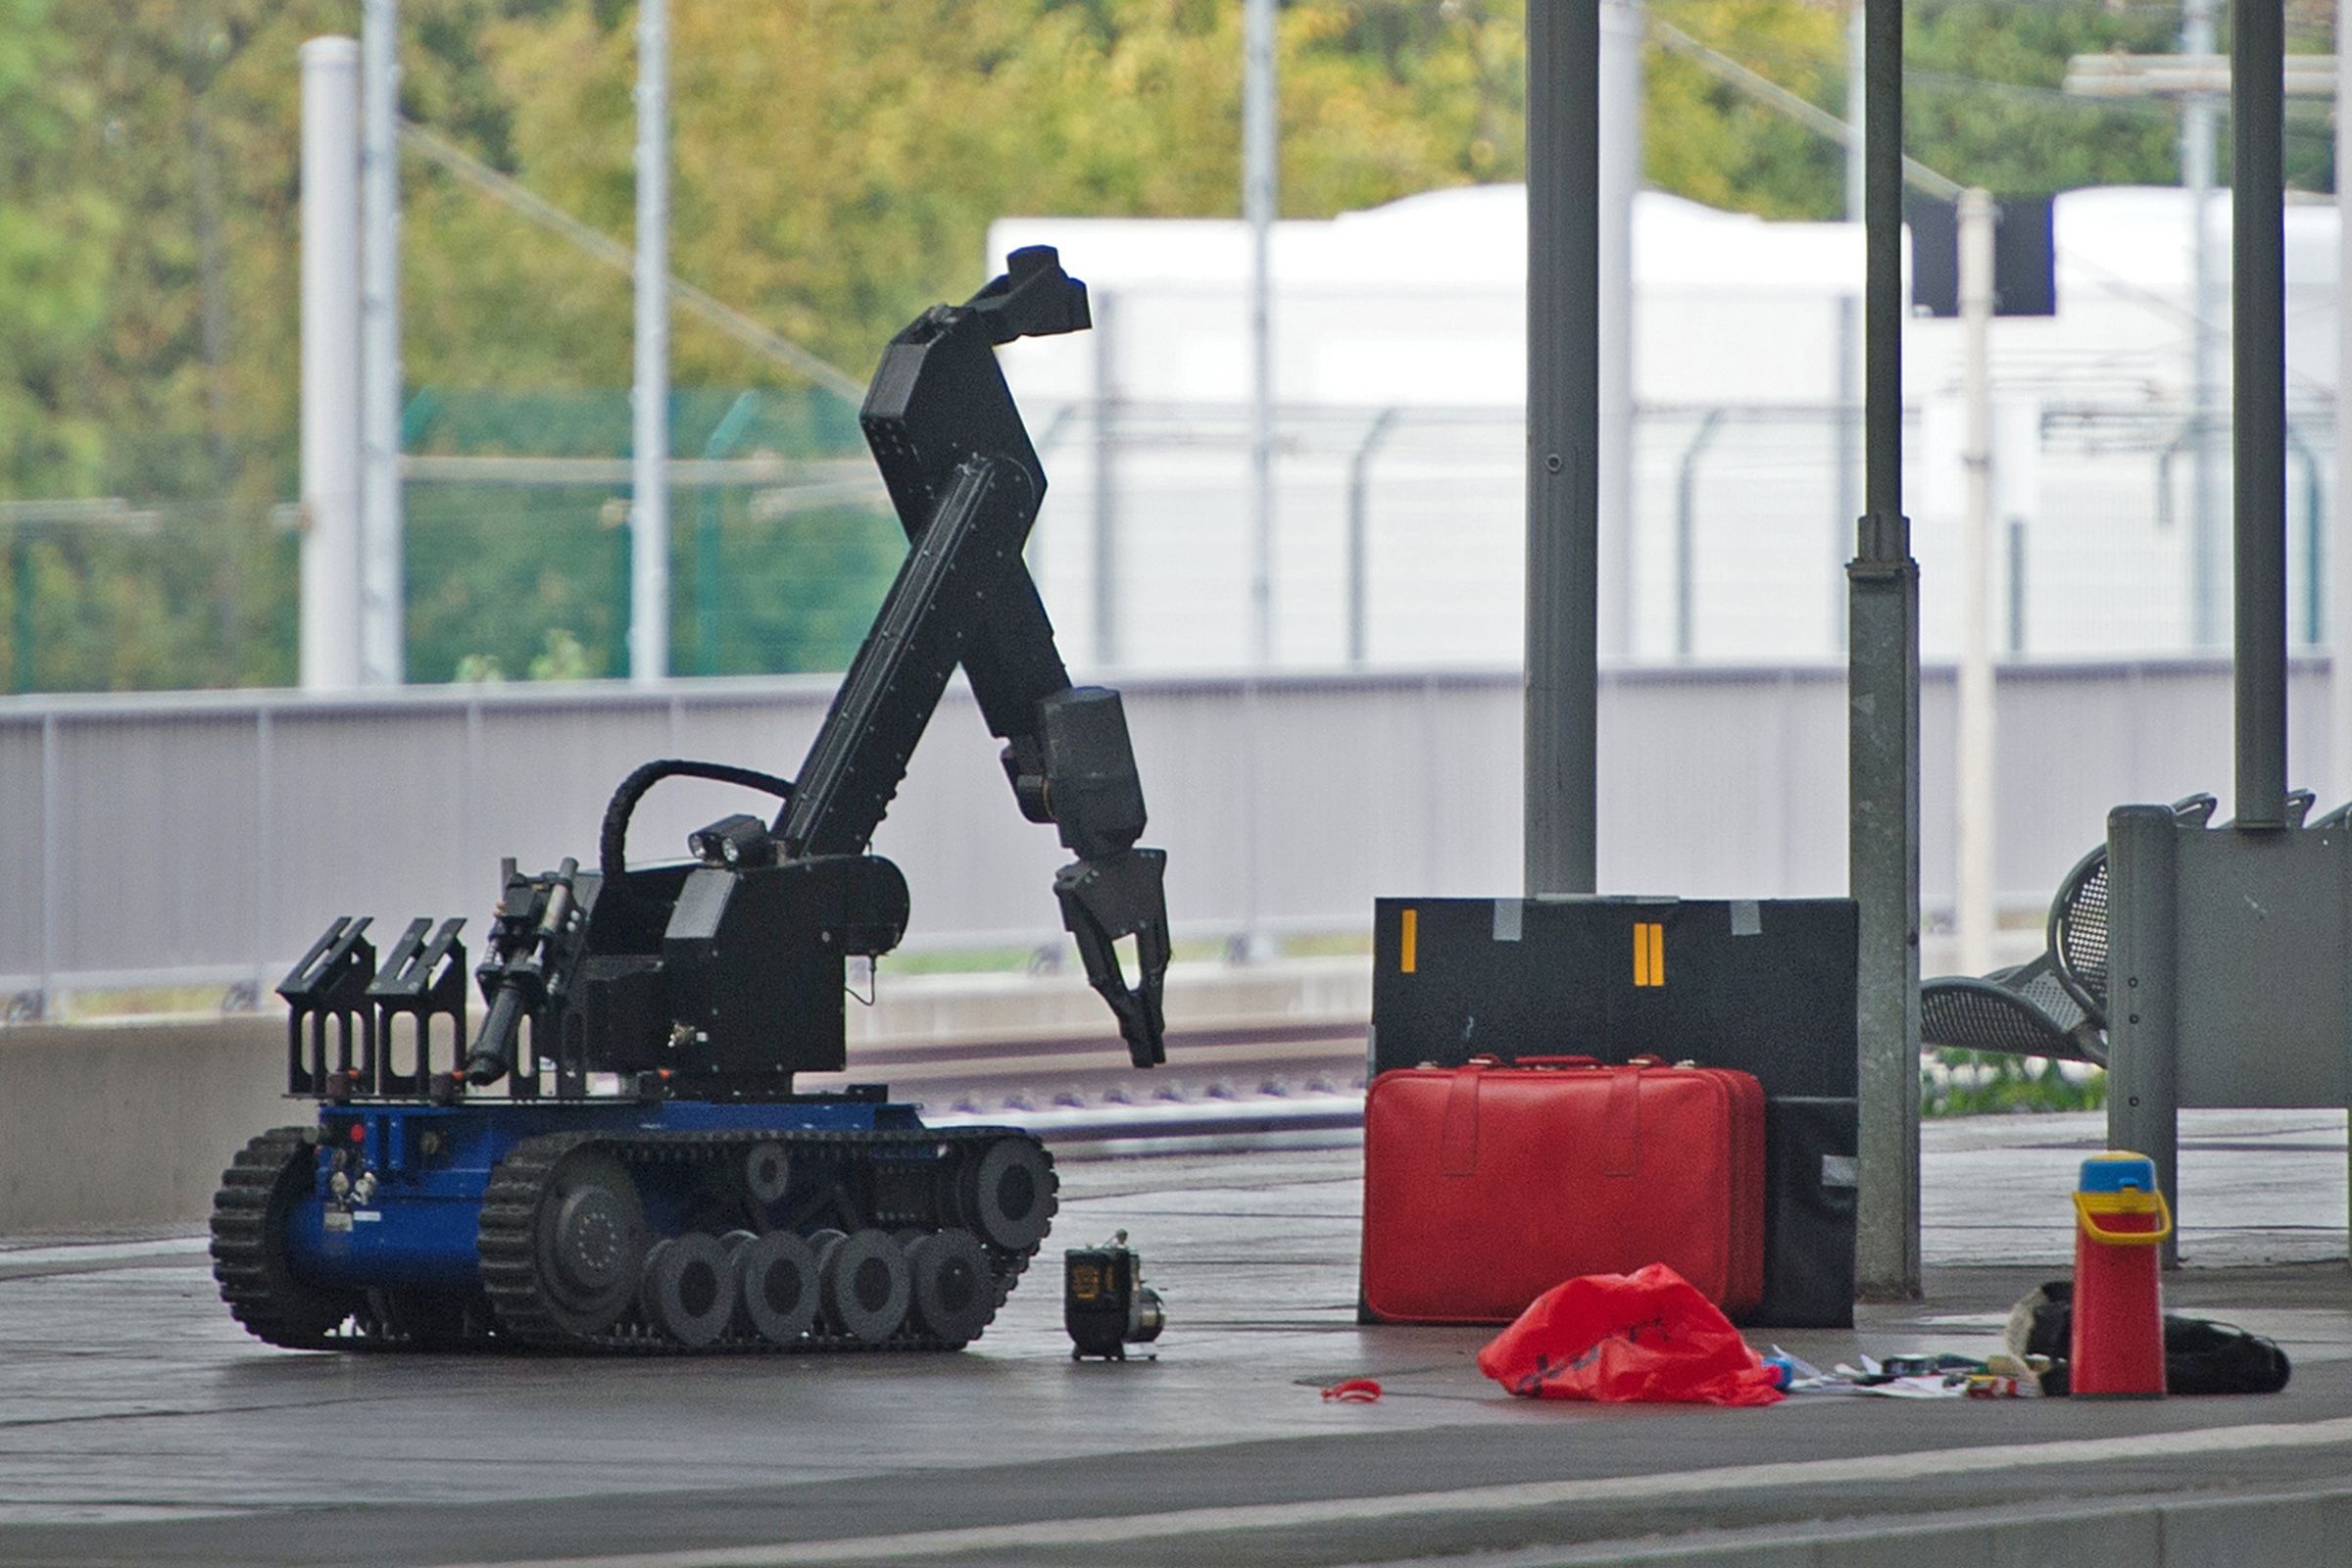 An image showing a remote-controlled robot used to disarm bombs